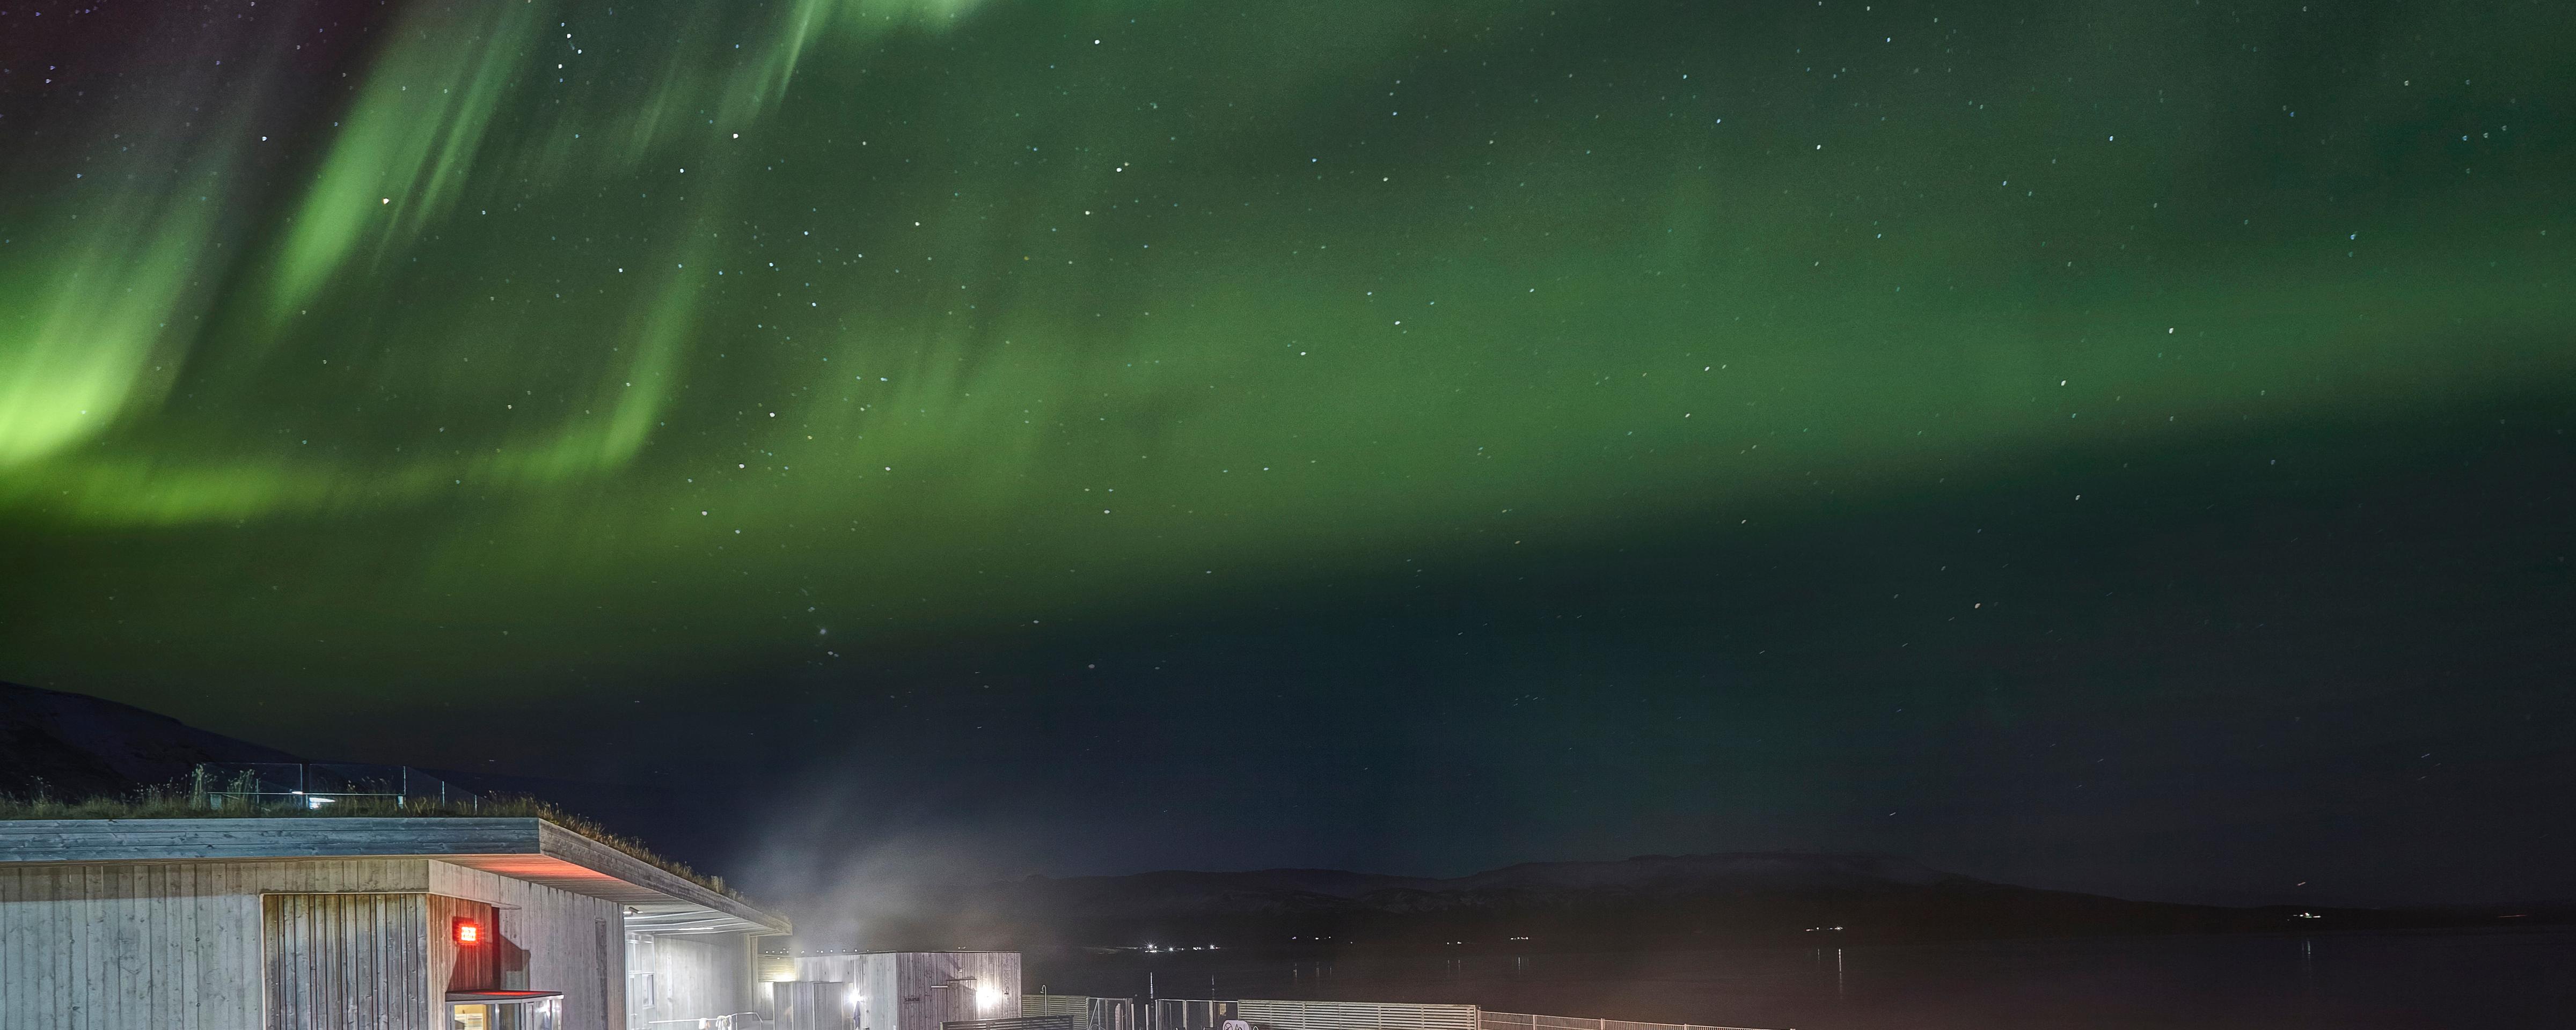 Evening in the Fontana Laugarvatn Baths, with Aurora Borealis Viewing - Depart from Reykjavik